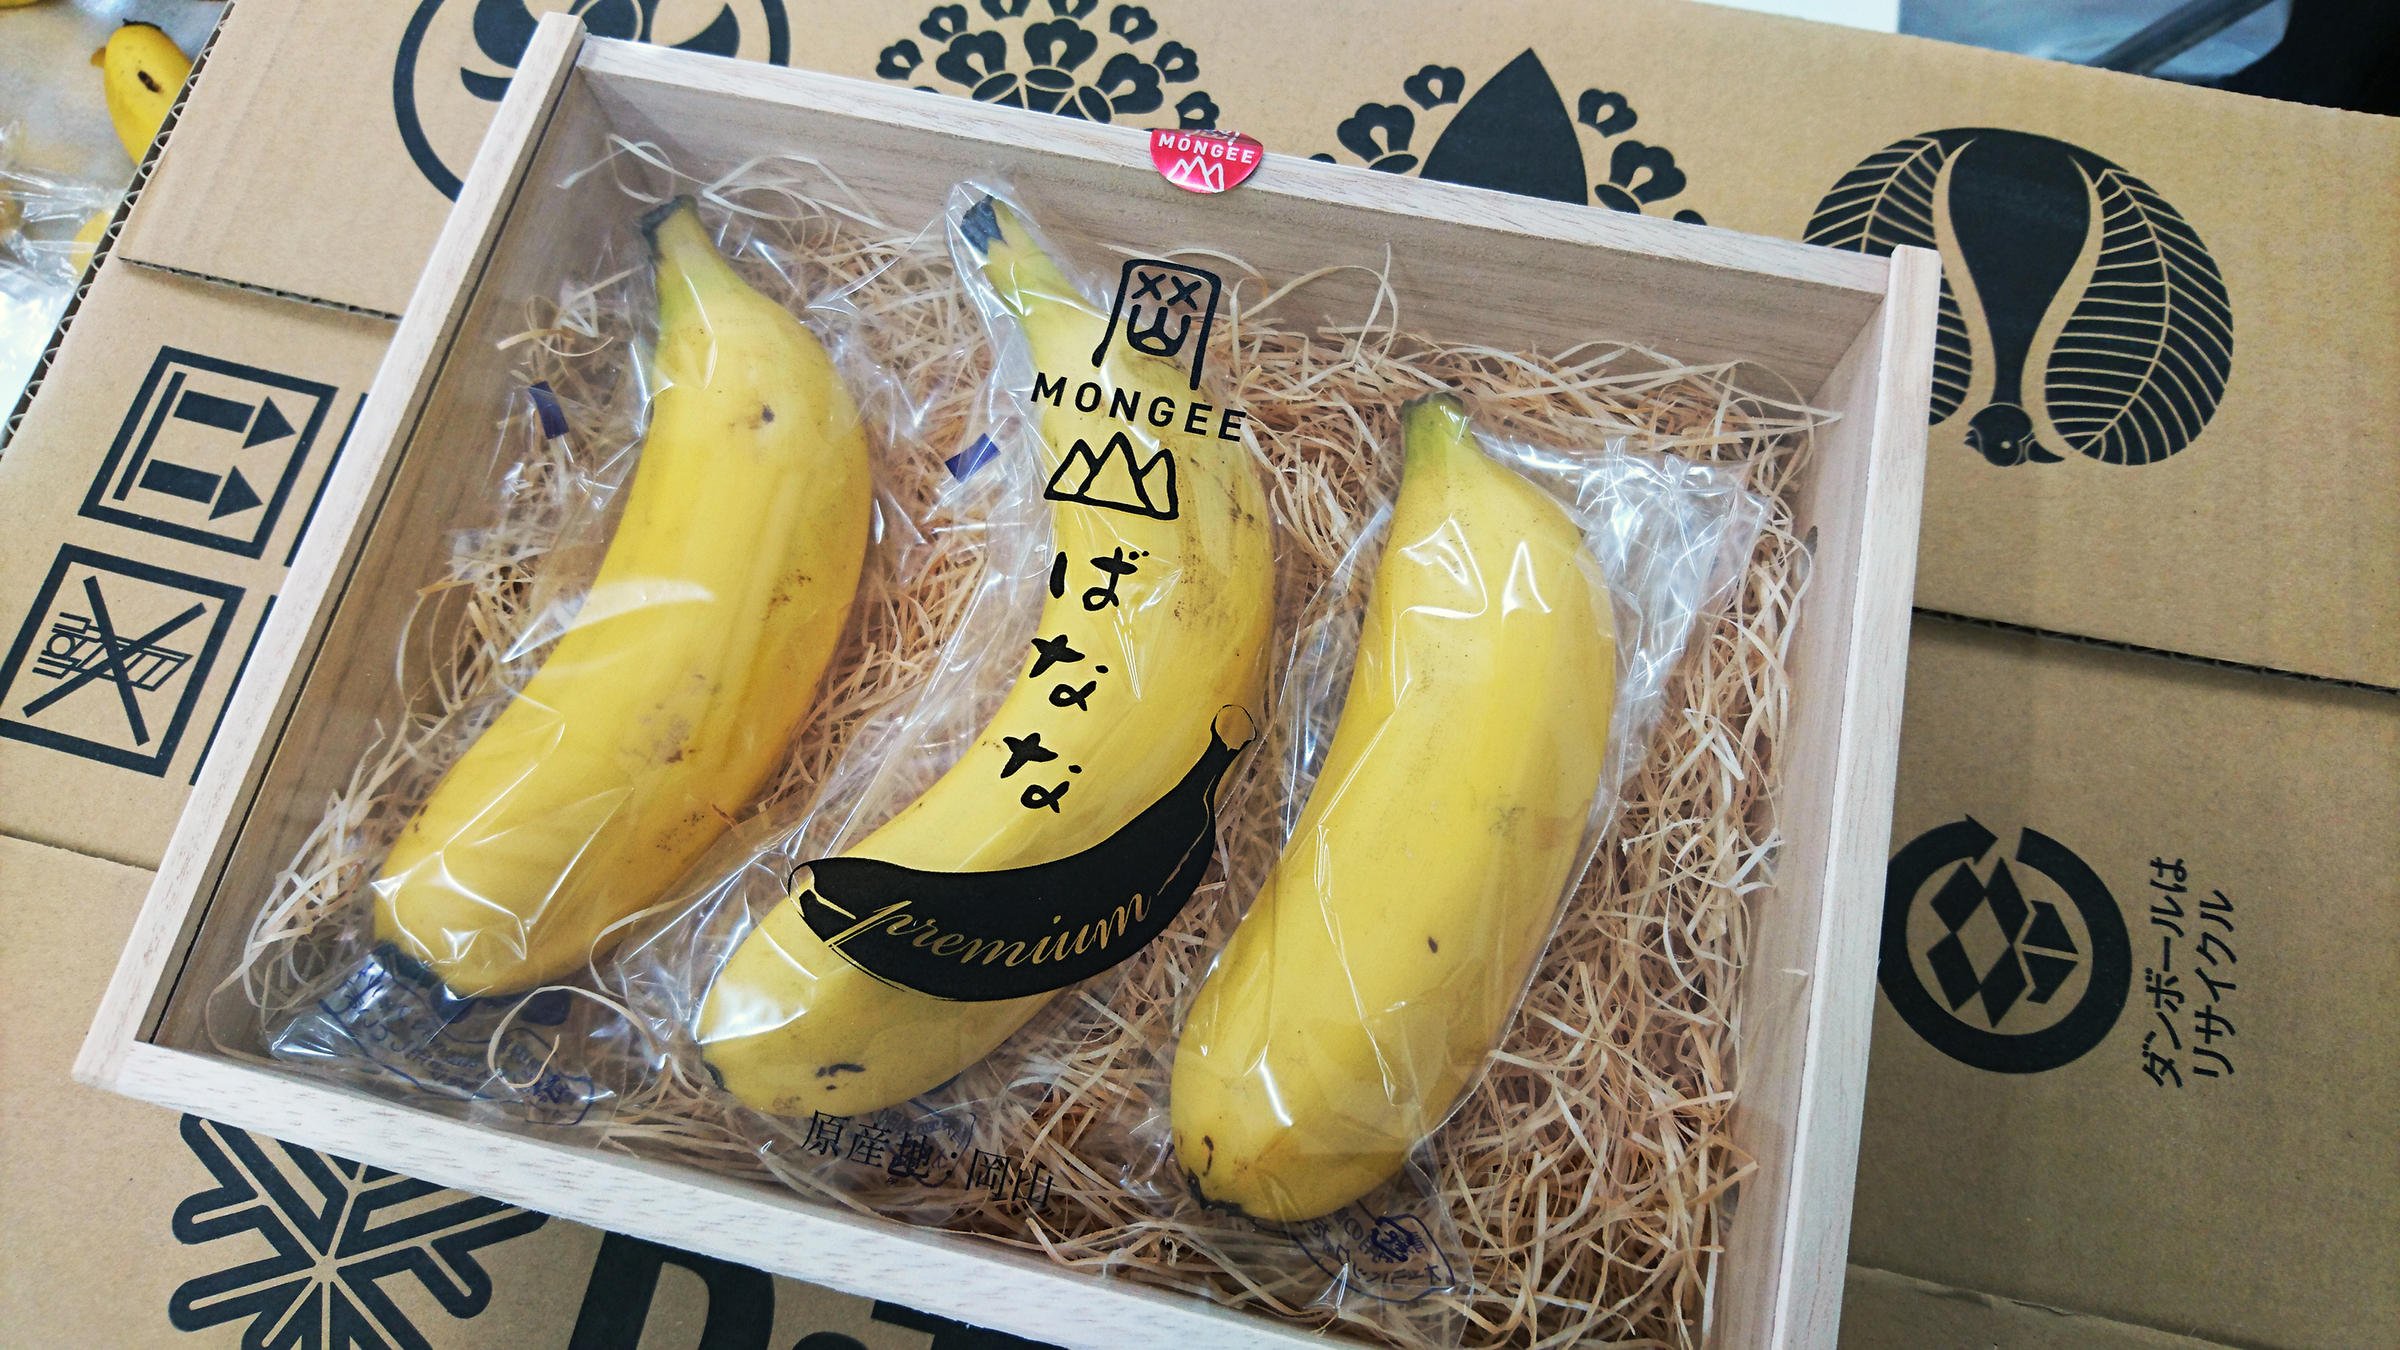 Mongee bananas reportedly sell for $6 each in Japan. Right now, they're very much a boutique crop. Source: D&T Farms